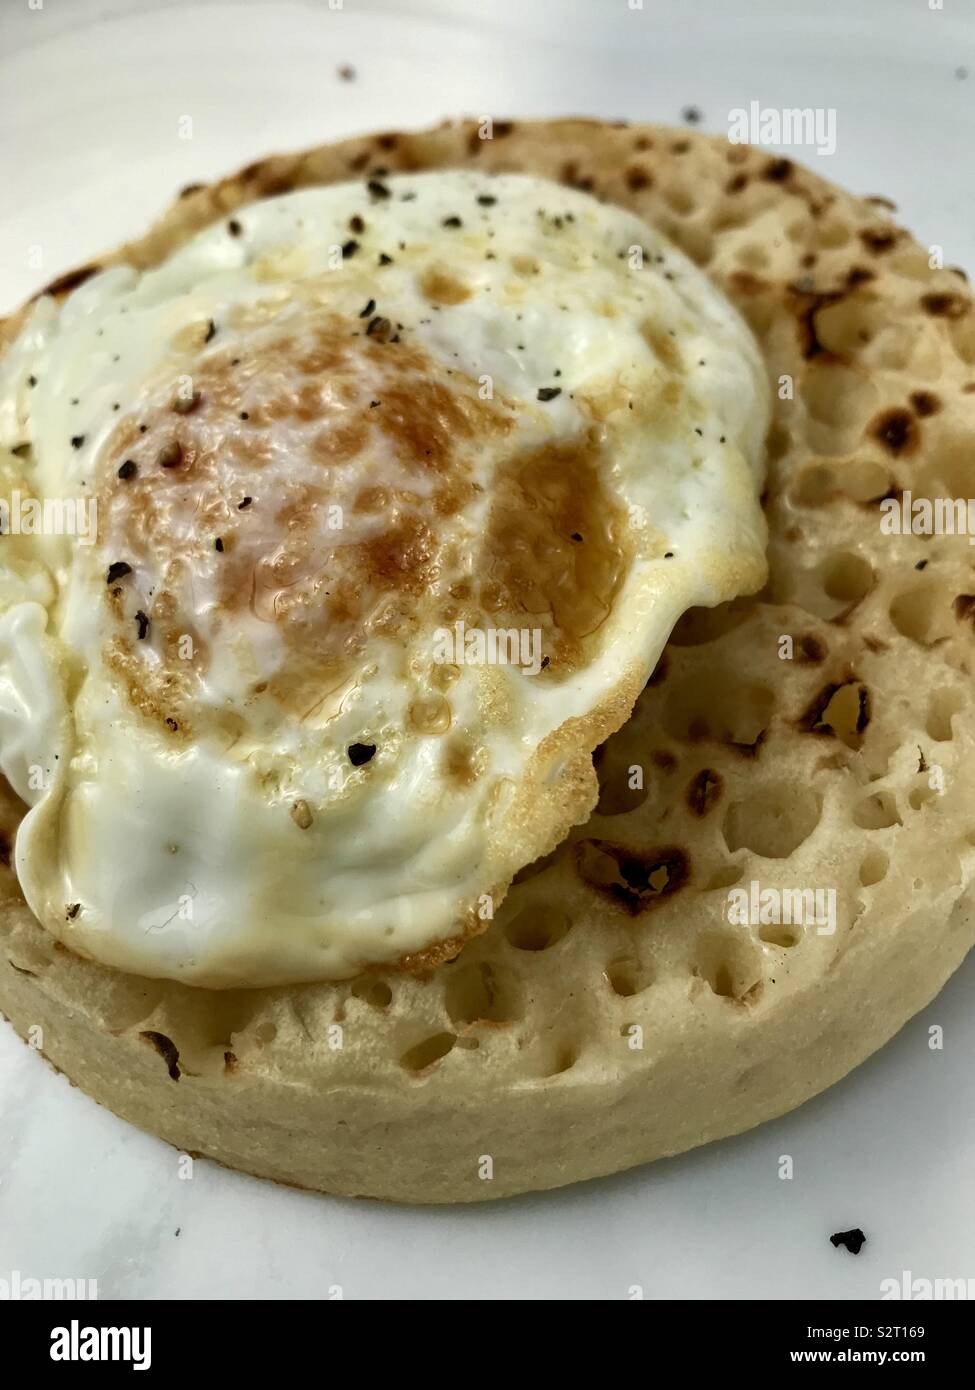 Breakfast Crumpet egg and cracked pepper Stock Photo